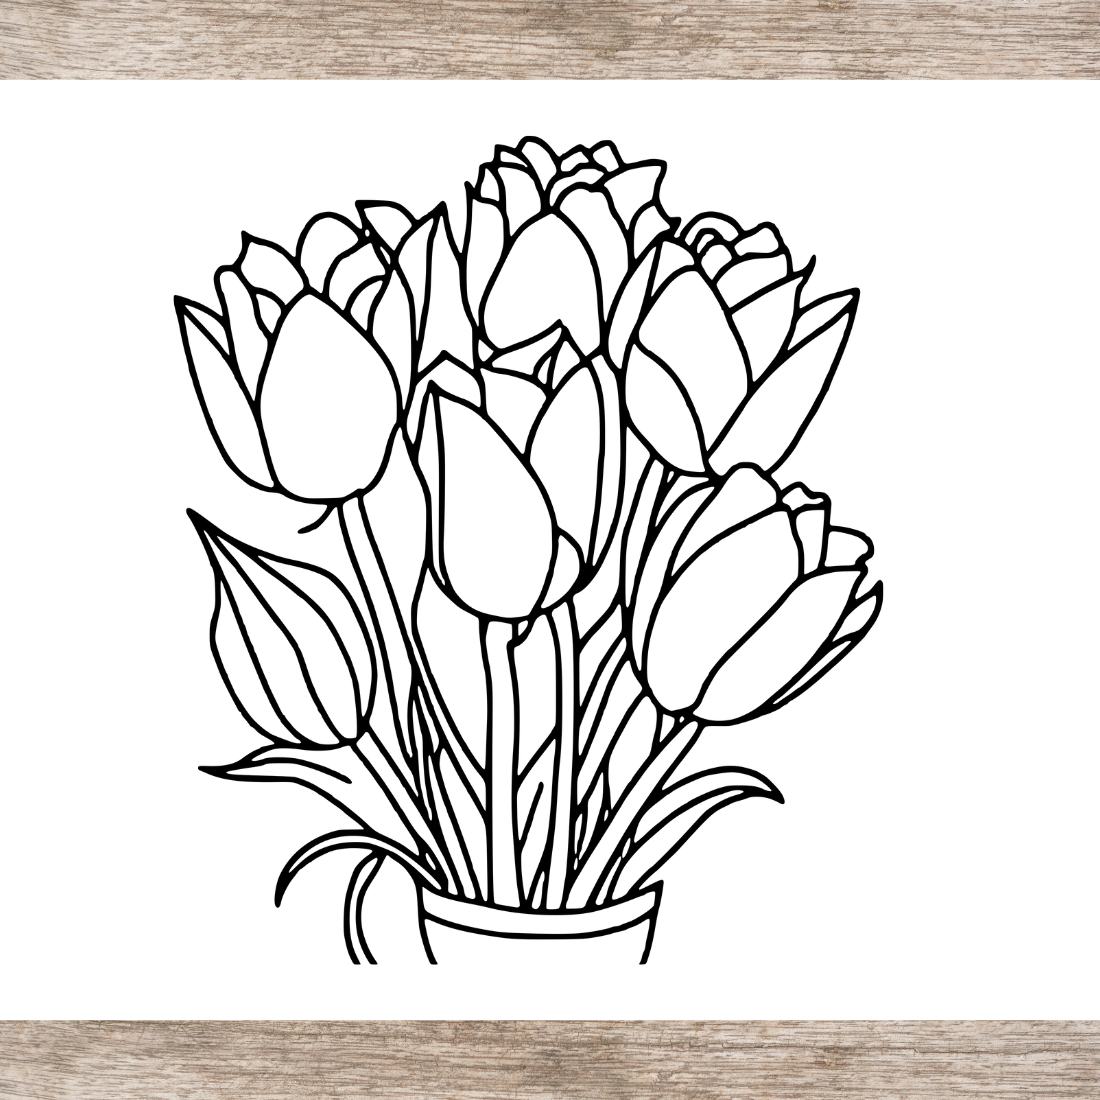 6 Flower Drawing Floral Coloring Pages For Adults (SVG and PNG) Use for KDP coloring books  preview image.